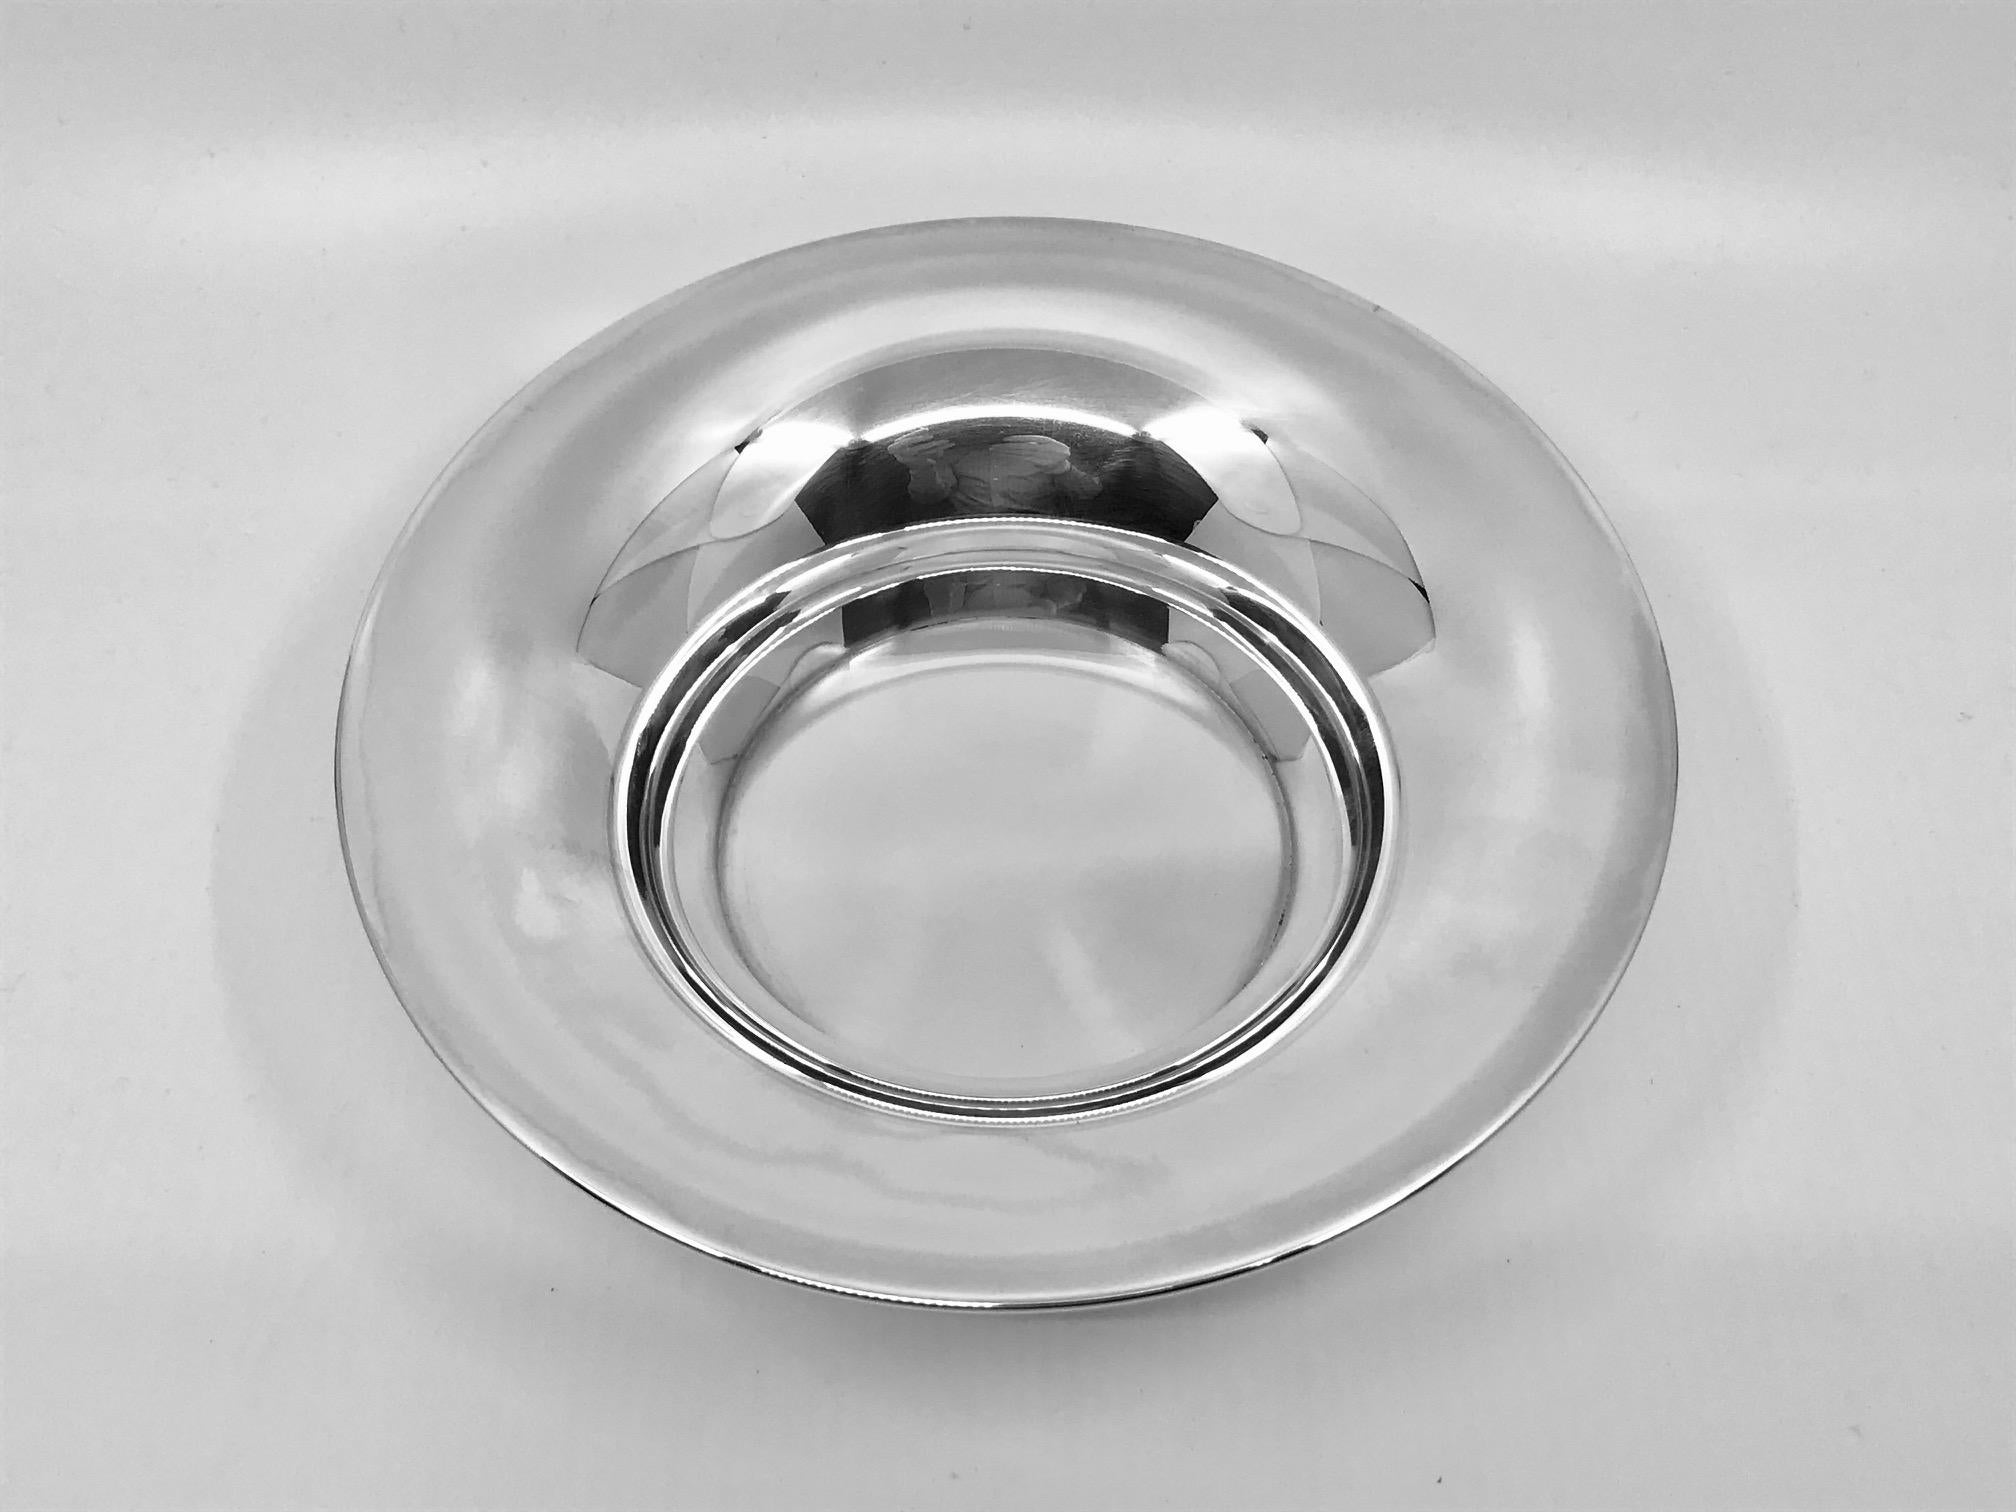 This is a modern sterling silver Georg Jensen bowl, design #1282 by Nanna Ditzel from the 1970s.

Measures 2? in height and 8 1/4? in diameter (5cm, 20.5cm).

Marked underneath with Georg Jensen hallmark and date code for 1984.